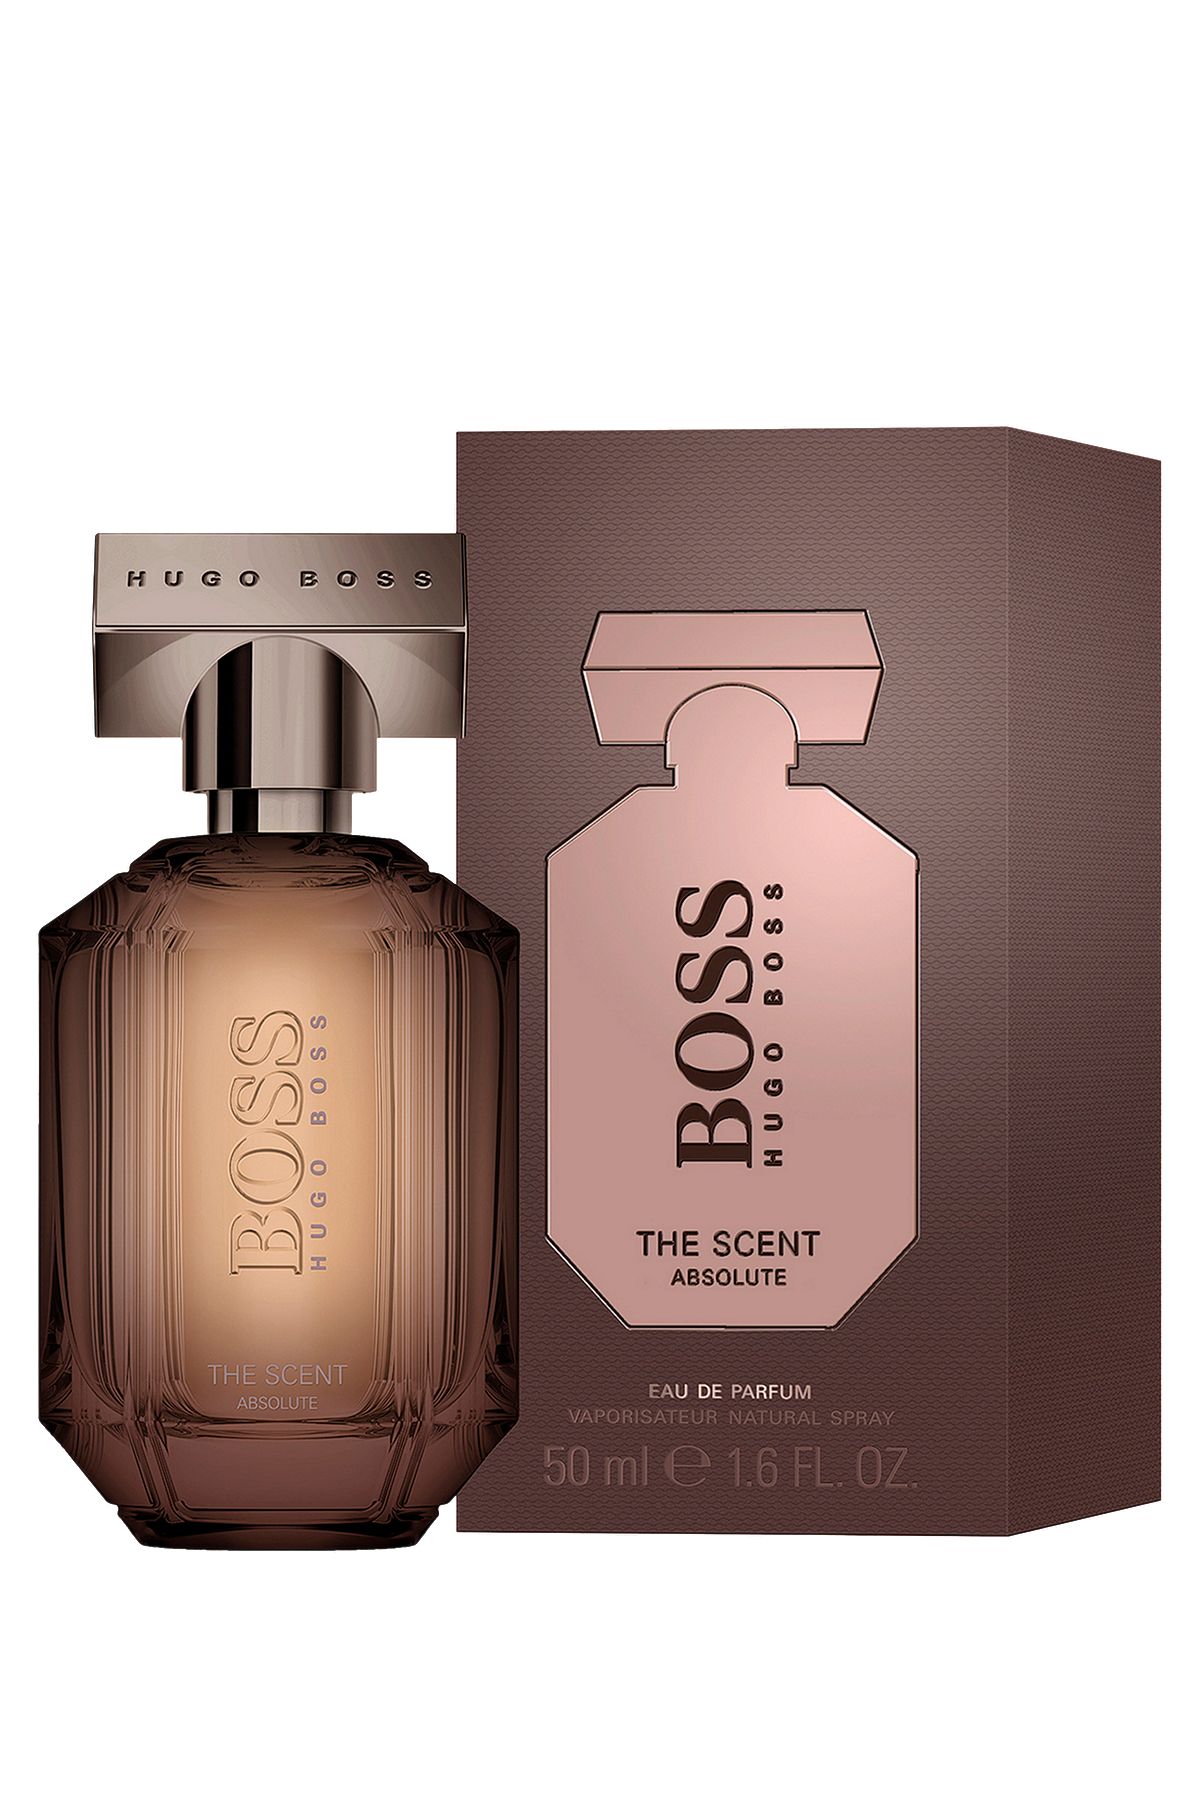 Eau de parfum BOSS The Scent Absolute For Her, 50 ml, Assorted-Pre-Pack